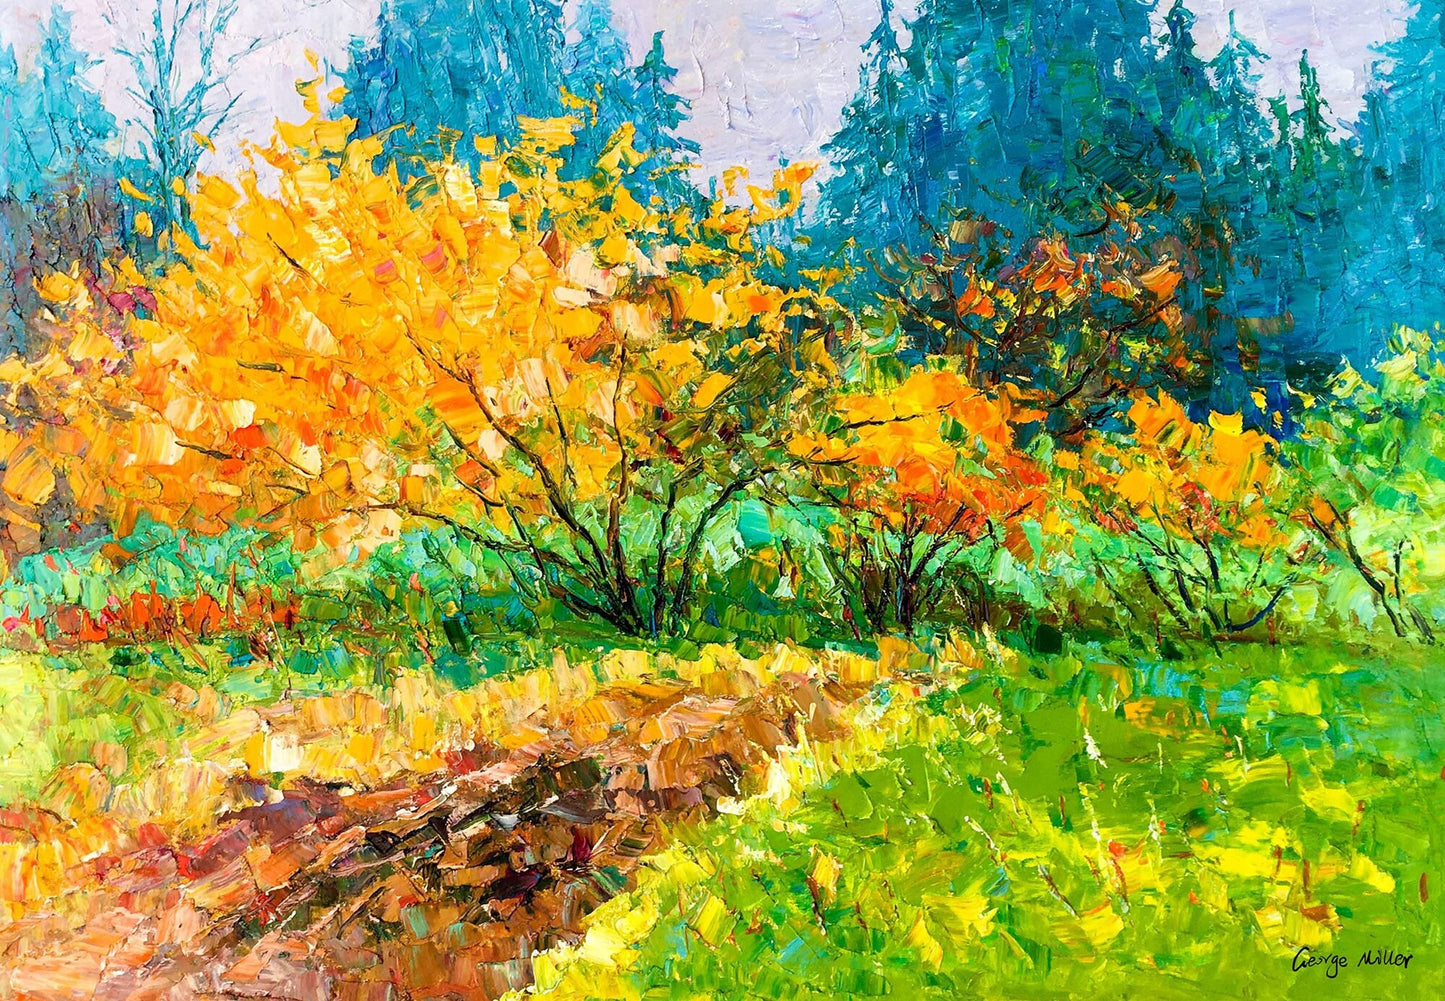 Landscape Oil Painting Spring Trees, Large Canvas Wall Art, Abstract Painting, Large Canvas Art, Green Yellow Blue, Original Oil Painting